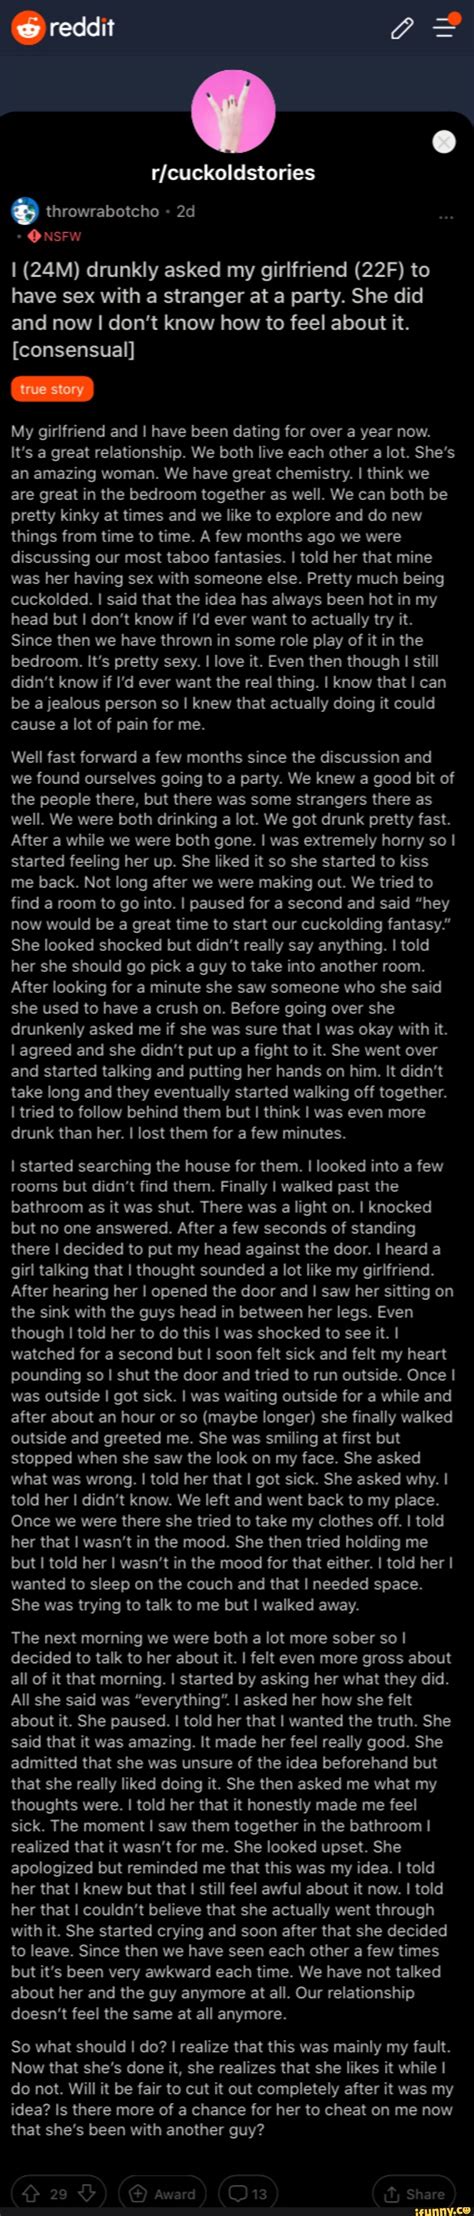 Reddit Throwrabotcho Onsfw I Drunkly Asked My Girlfriend To Have Sex